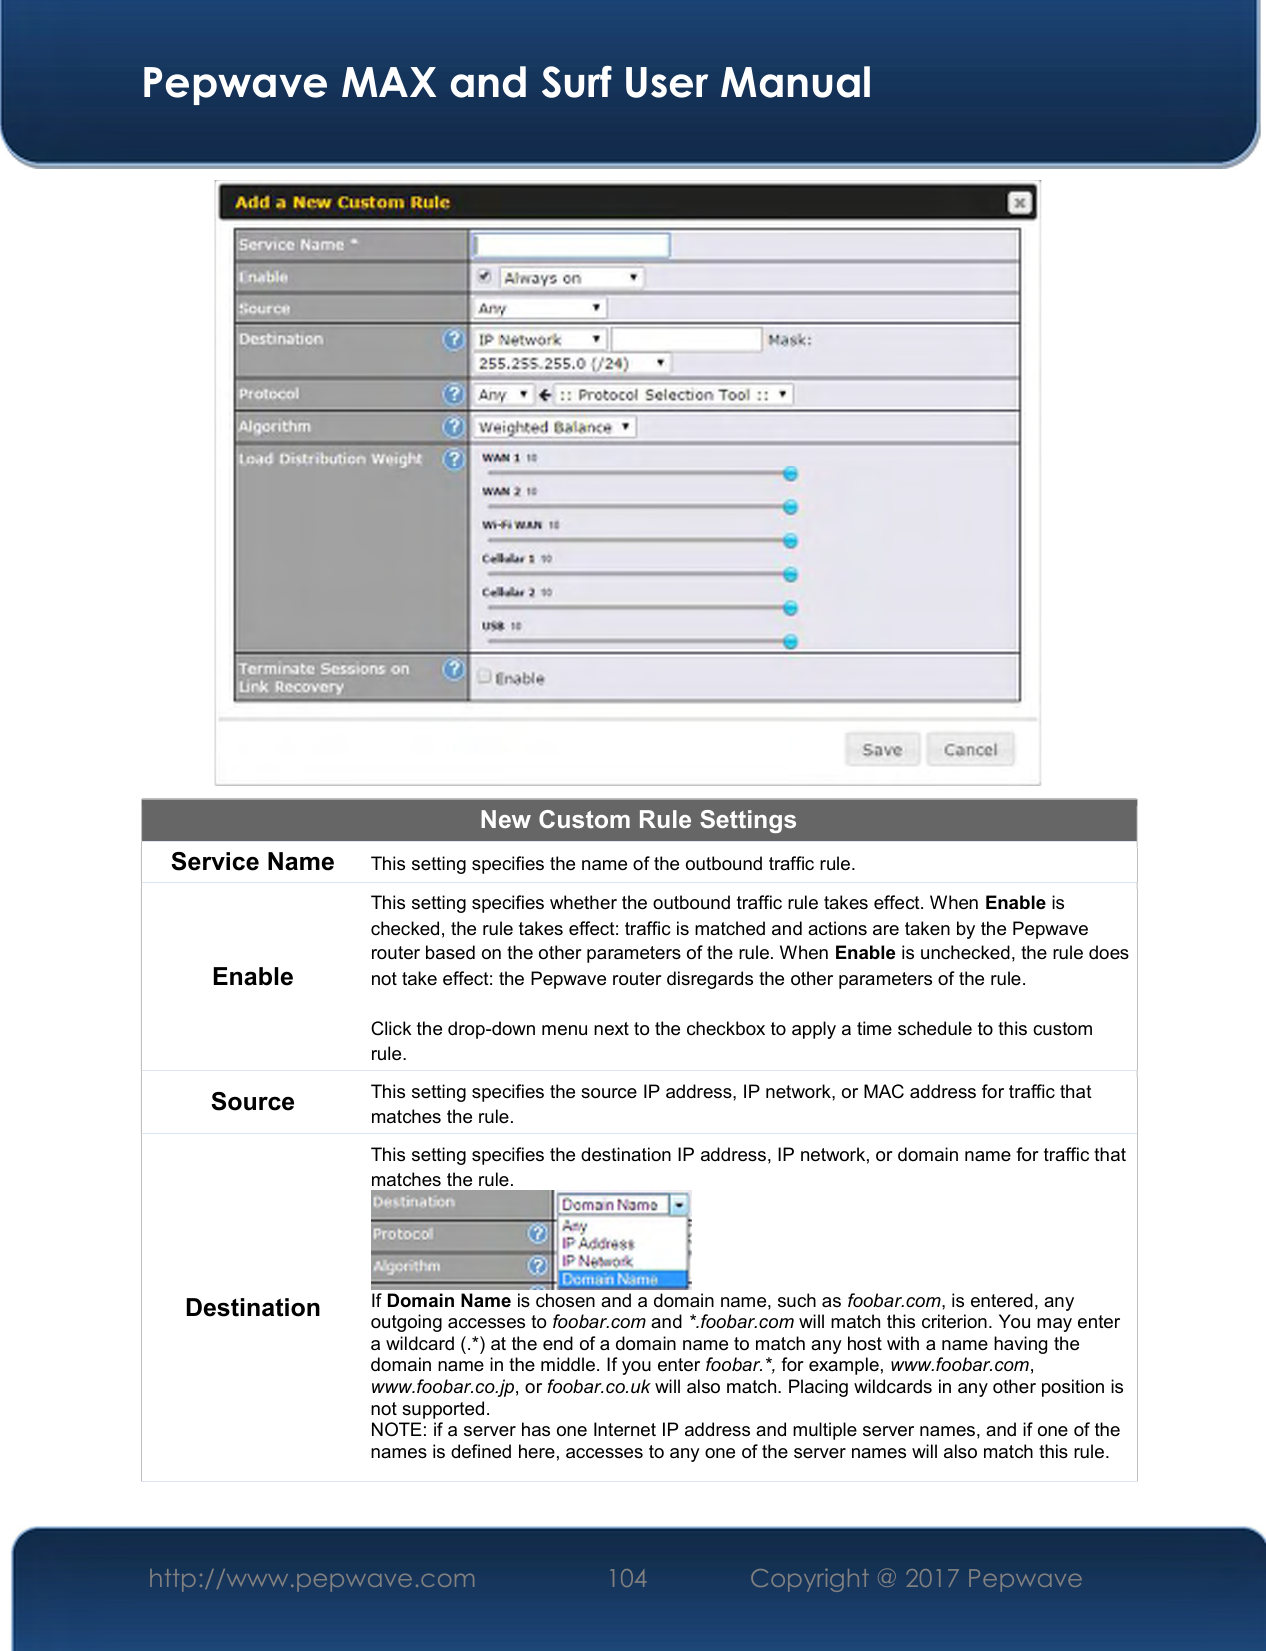  Pepwave MAX and Surf User Manual http://www.pepwave.com  104    Copyright @ 2017 Pepwave    New Custom Rule Settings Service Name This setting specifies the name of the outbound traffic rule. Enable This setting specifies whether the outbound traffic rule takes effect. When Enable is checked, the rule takes effect: traffic is matched and actions are taken by the Pepwave router based on the other parameters of the rule. When Enable is unchecked, the rule does not take effect: the Pepwave router disregards the other parameters of the rule.  Click the drop-down menu next to the checkbox to apply a time schedule to this custom rule. Source  This setting specifies the source IP address, IP network, or MAC address for traffic that matches the rule. Destination This setting specifies the destination IP address, IP network, or domain name for traffic that matches the rule.  If Domain Name is chosen and a domain name, such as foobar.com, is entered, any outgoing accesses to foobar.com and *.foobar.com will match this criterion. You may enter a wildcard (.*) at the end of a domain name to match any host with a name having the domain name in the middle. If you enter foobar.*, for example, www.foobar.com, www.foobar.co.jp, or foobar.co.uk will also match. Placing wildcards in any other position is not supported. NOTE: if a server has one Internet IP address and multiple server names, and if one of the names is defined here, accesses to any one of the server names will also match this rule. 